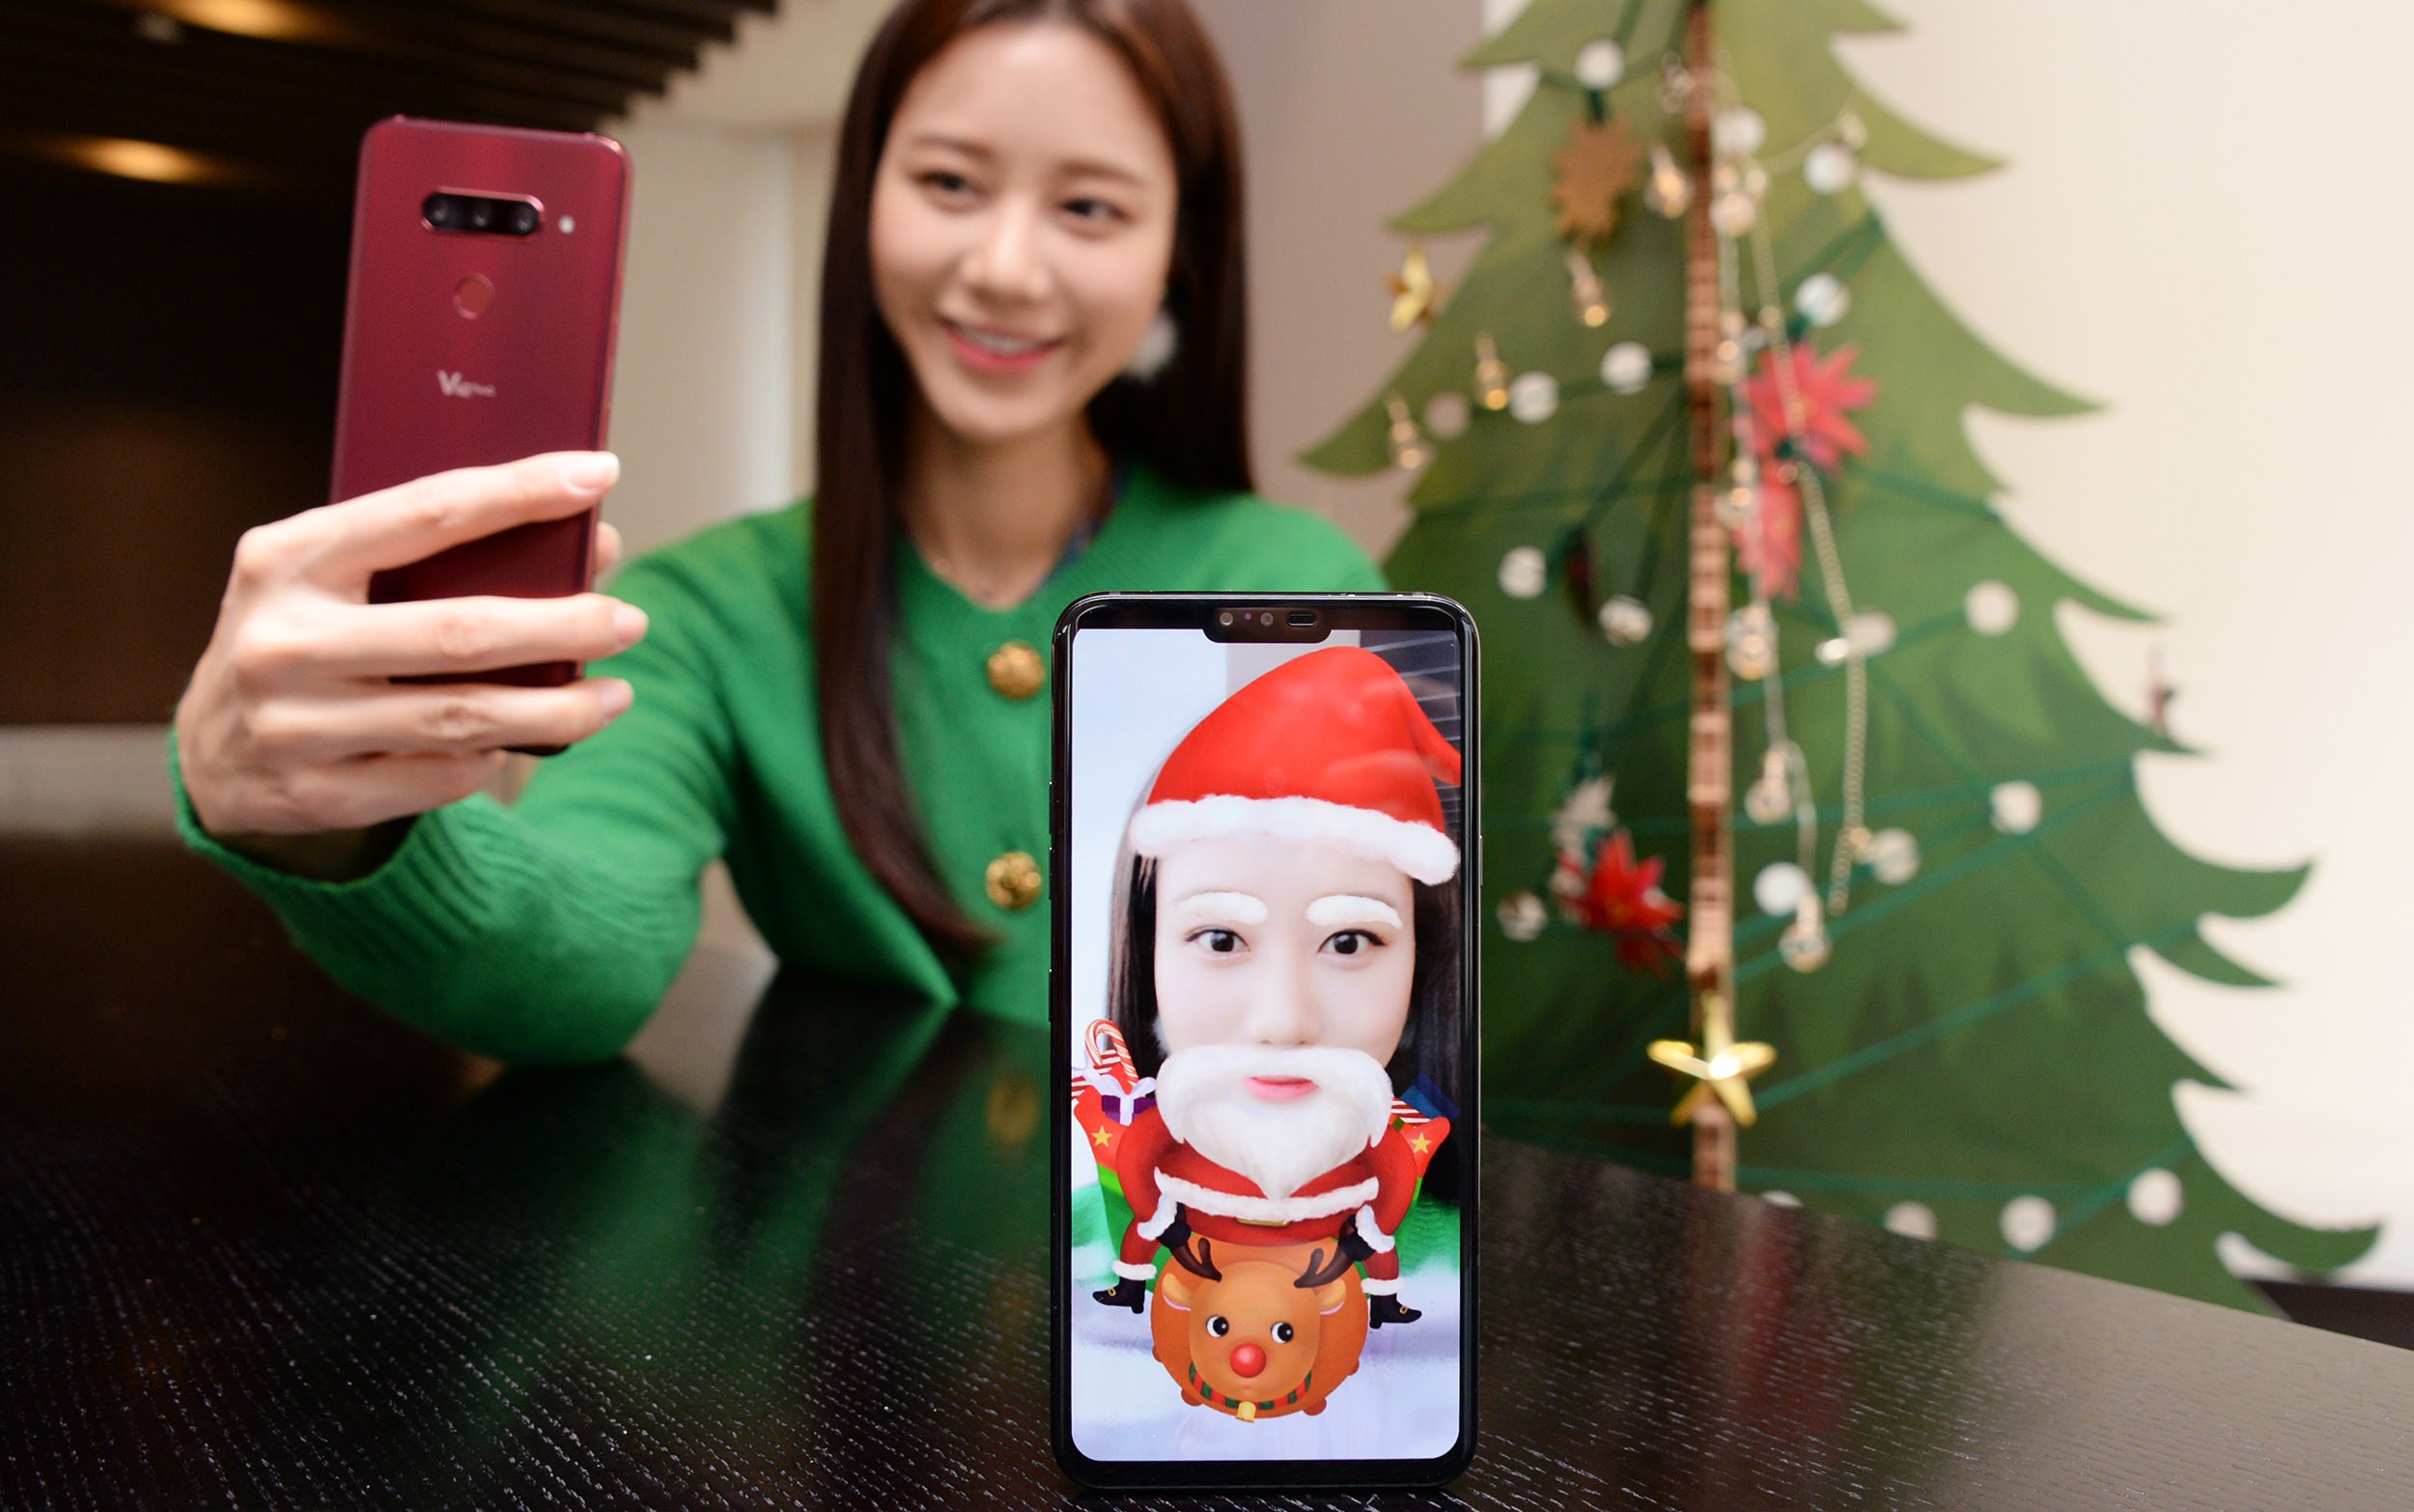 A woman turns her selfie into a Santa Claus lookalike by using the Augmented Reality (AR) sticker function of LG V40 ThinQ.